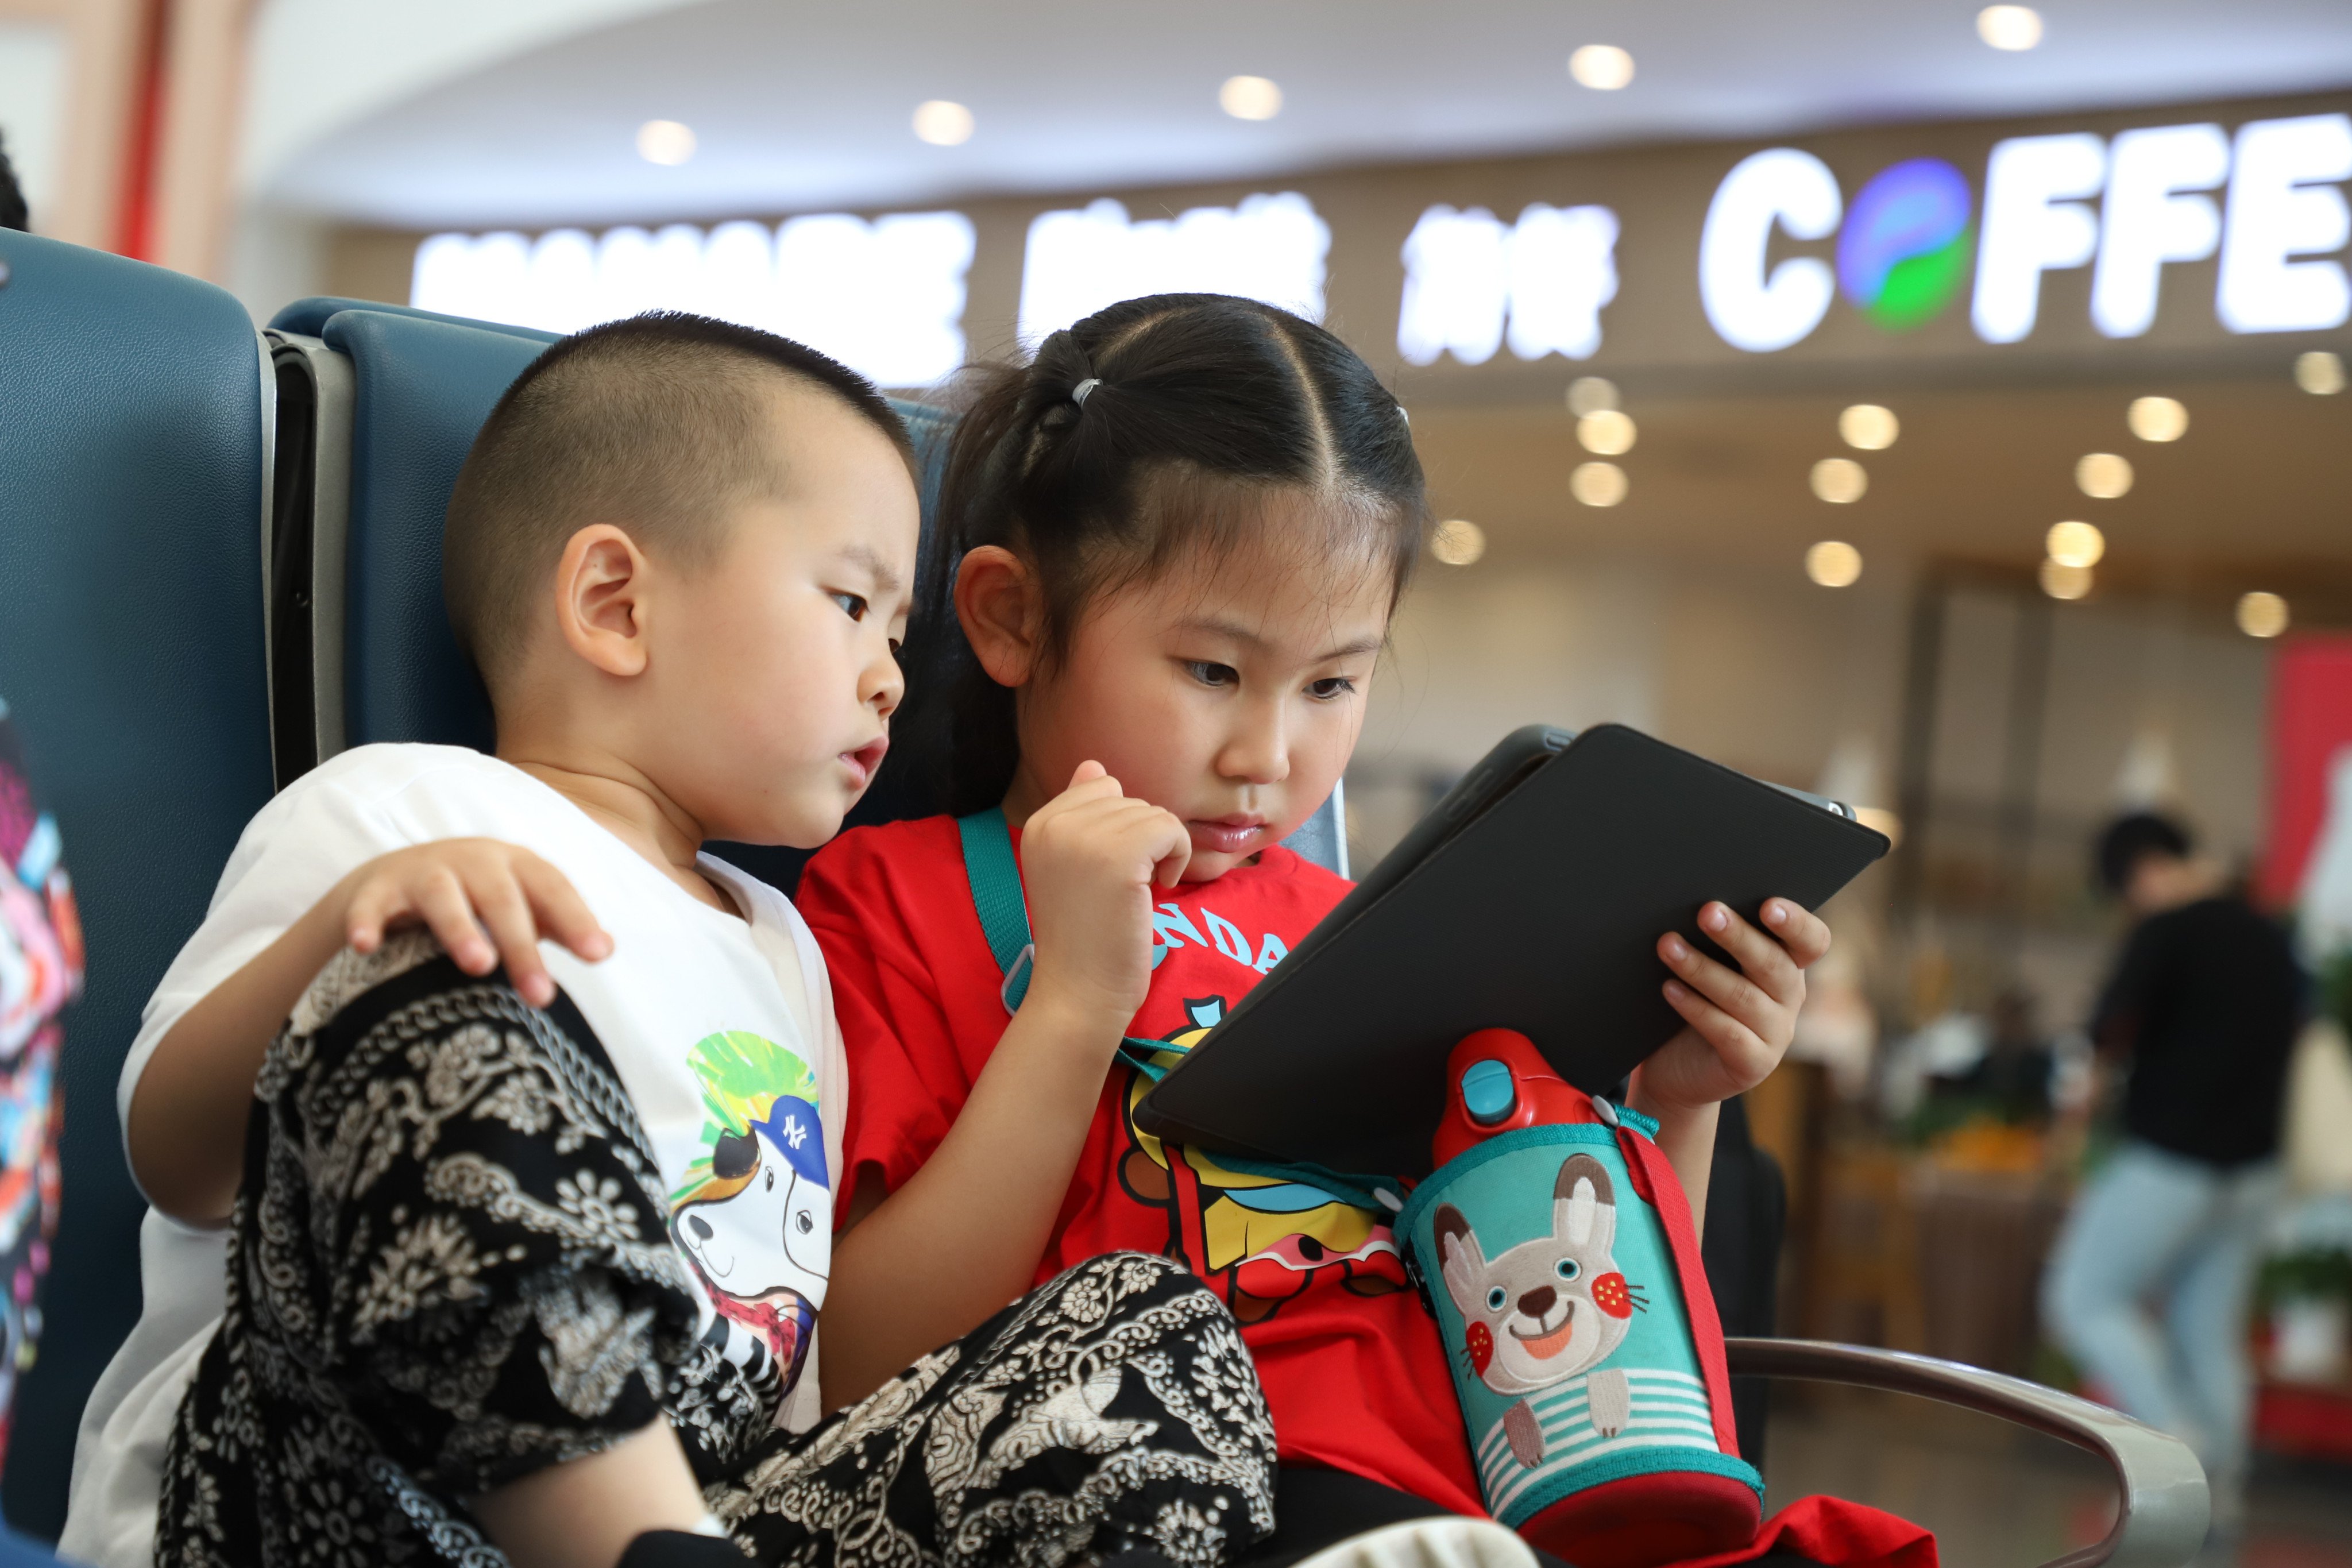 Two children play video games on a tablet at an airport in Xian, China. Photo: Shutterstock